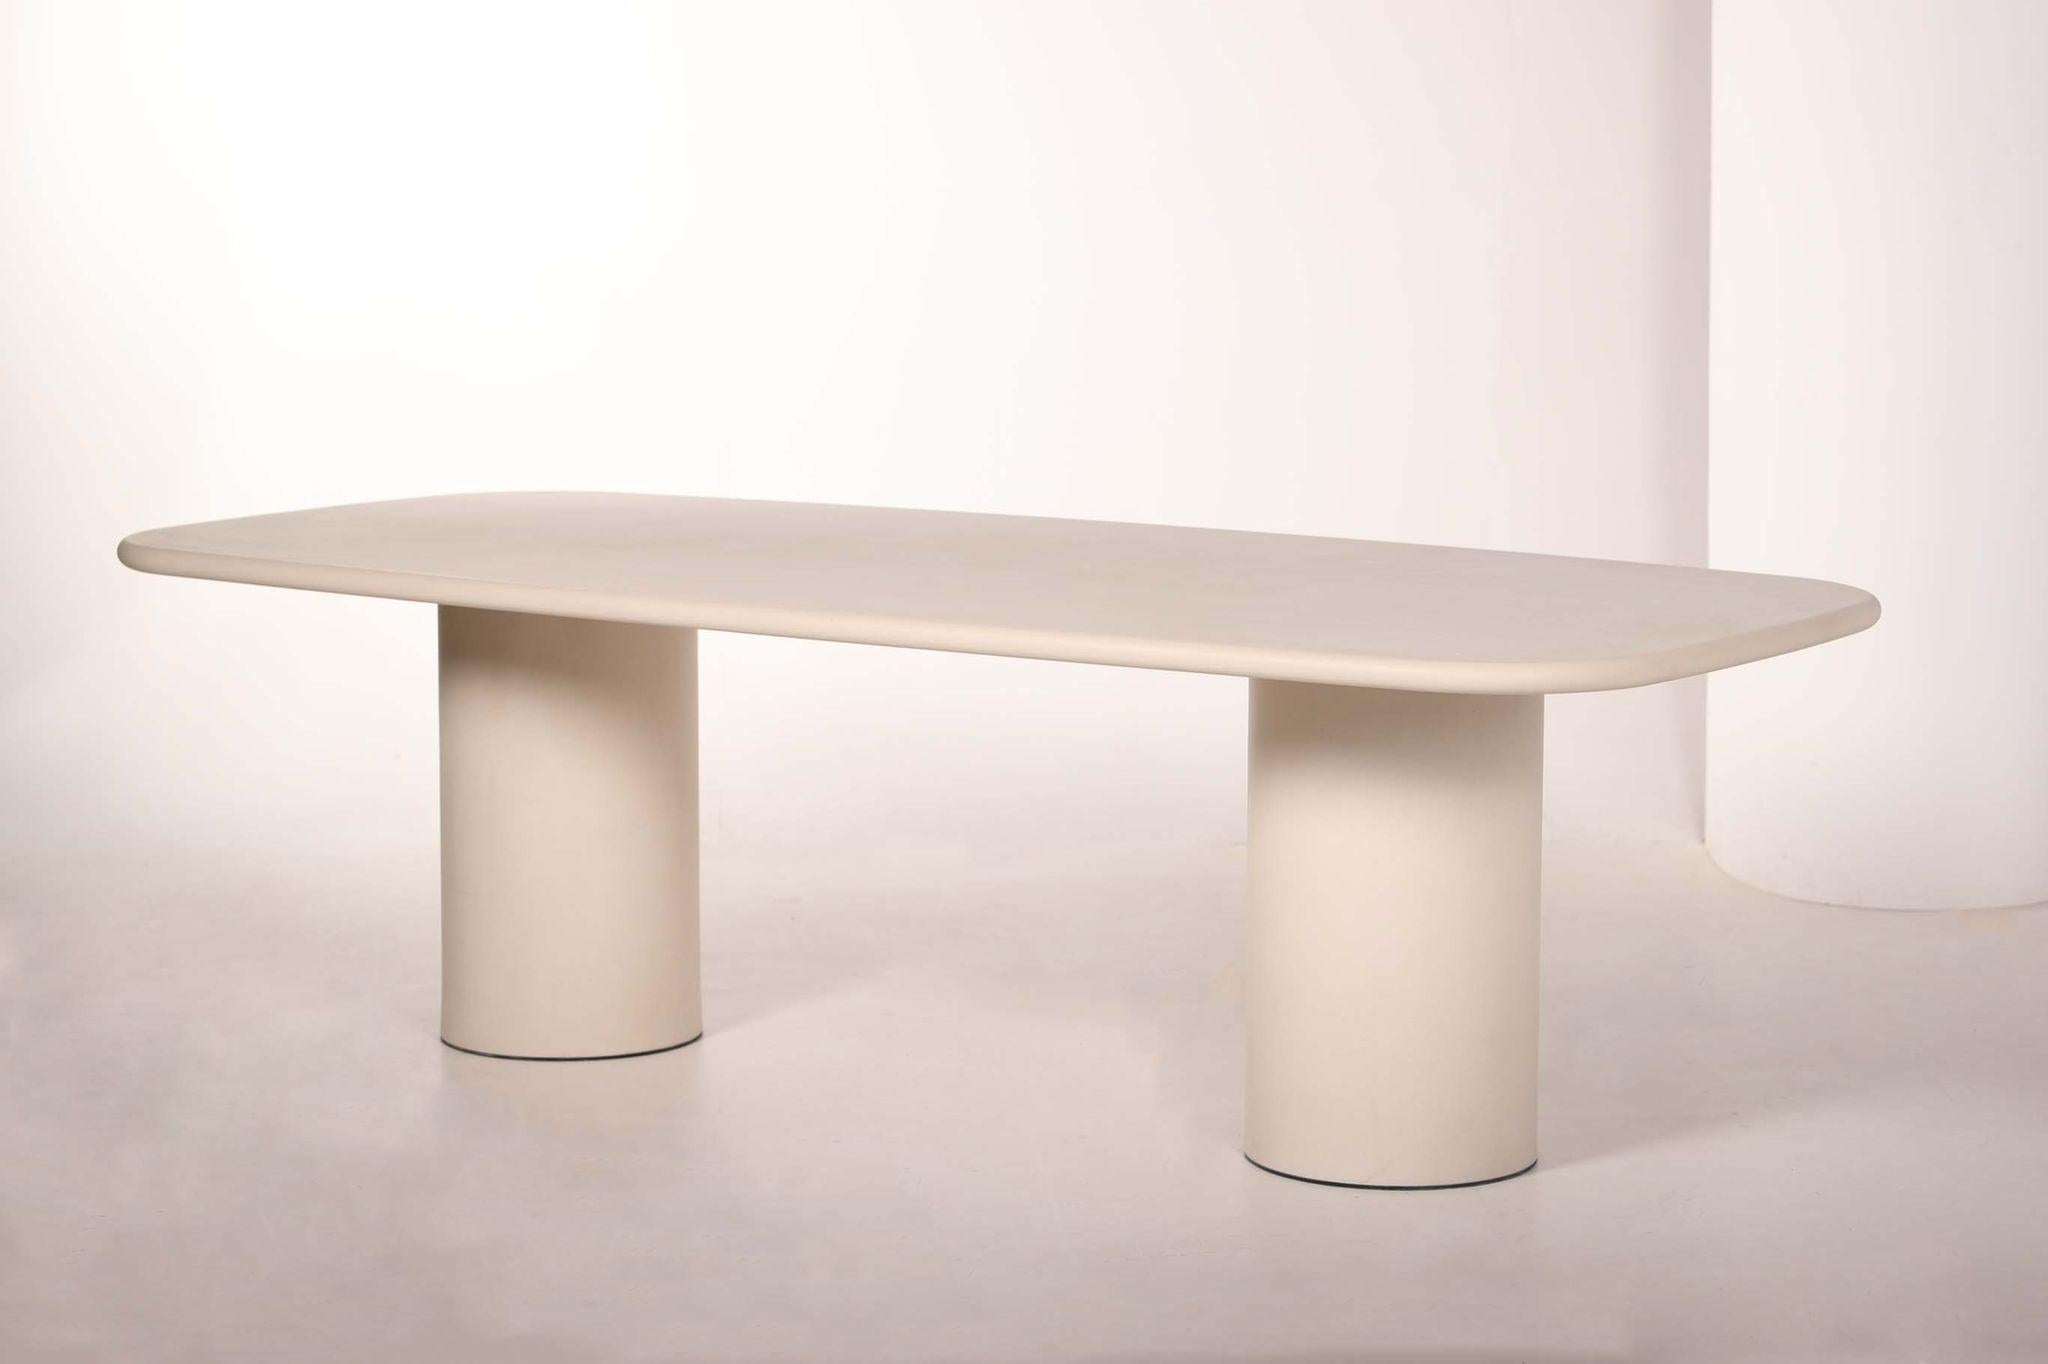 Natural Plaster Hand-Sculpted dining table 360 by Galerie Philia Edition
Dimensions: L 360 x W 110 cm
Customized height, please contact us.
10/12 pers.
Materials: Mineral lime plaster.

Our tables are in mineral lime plaster, unlike mortex,